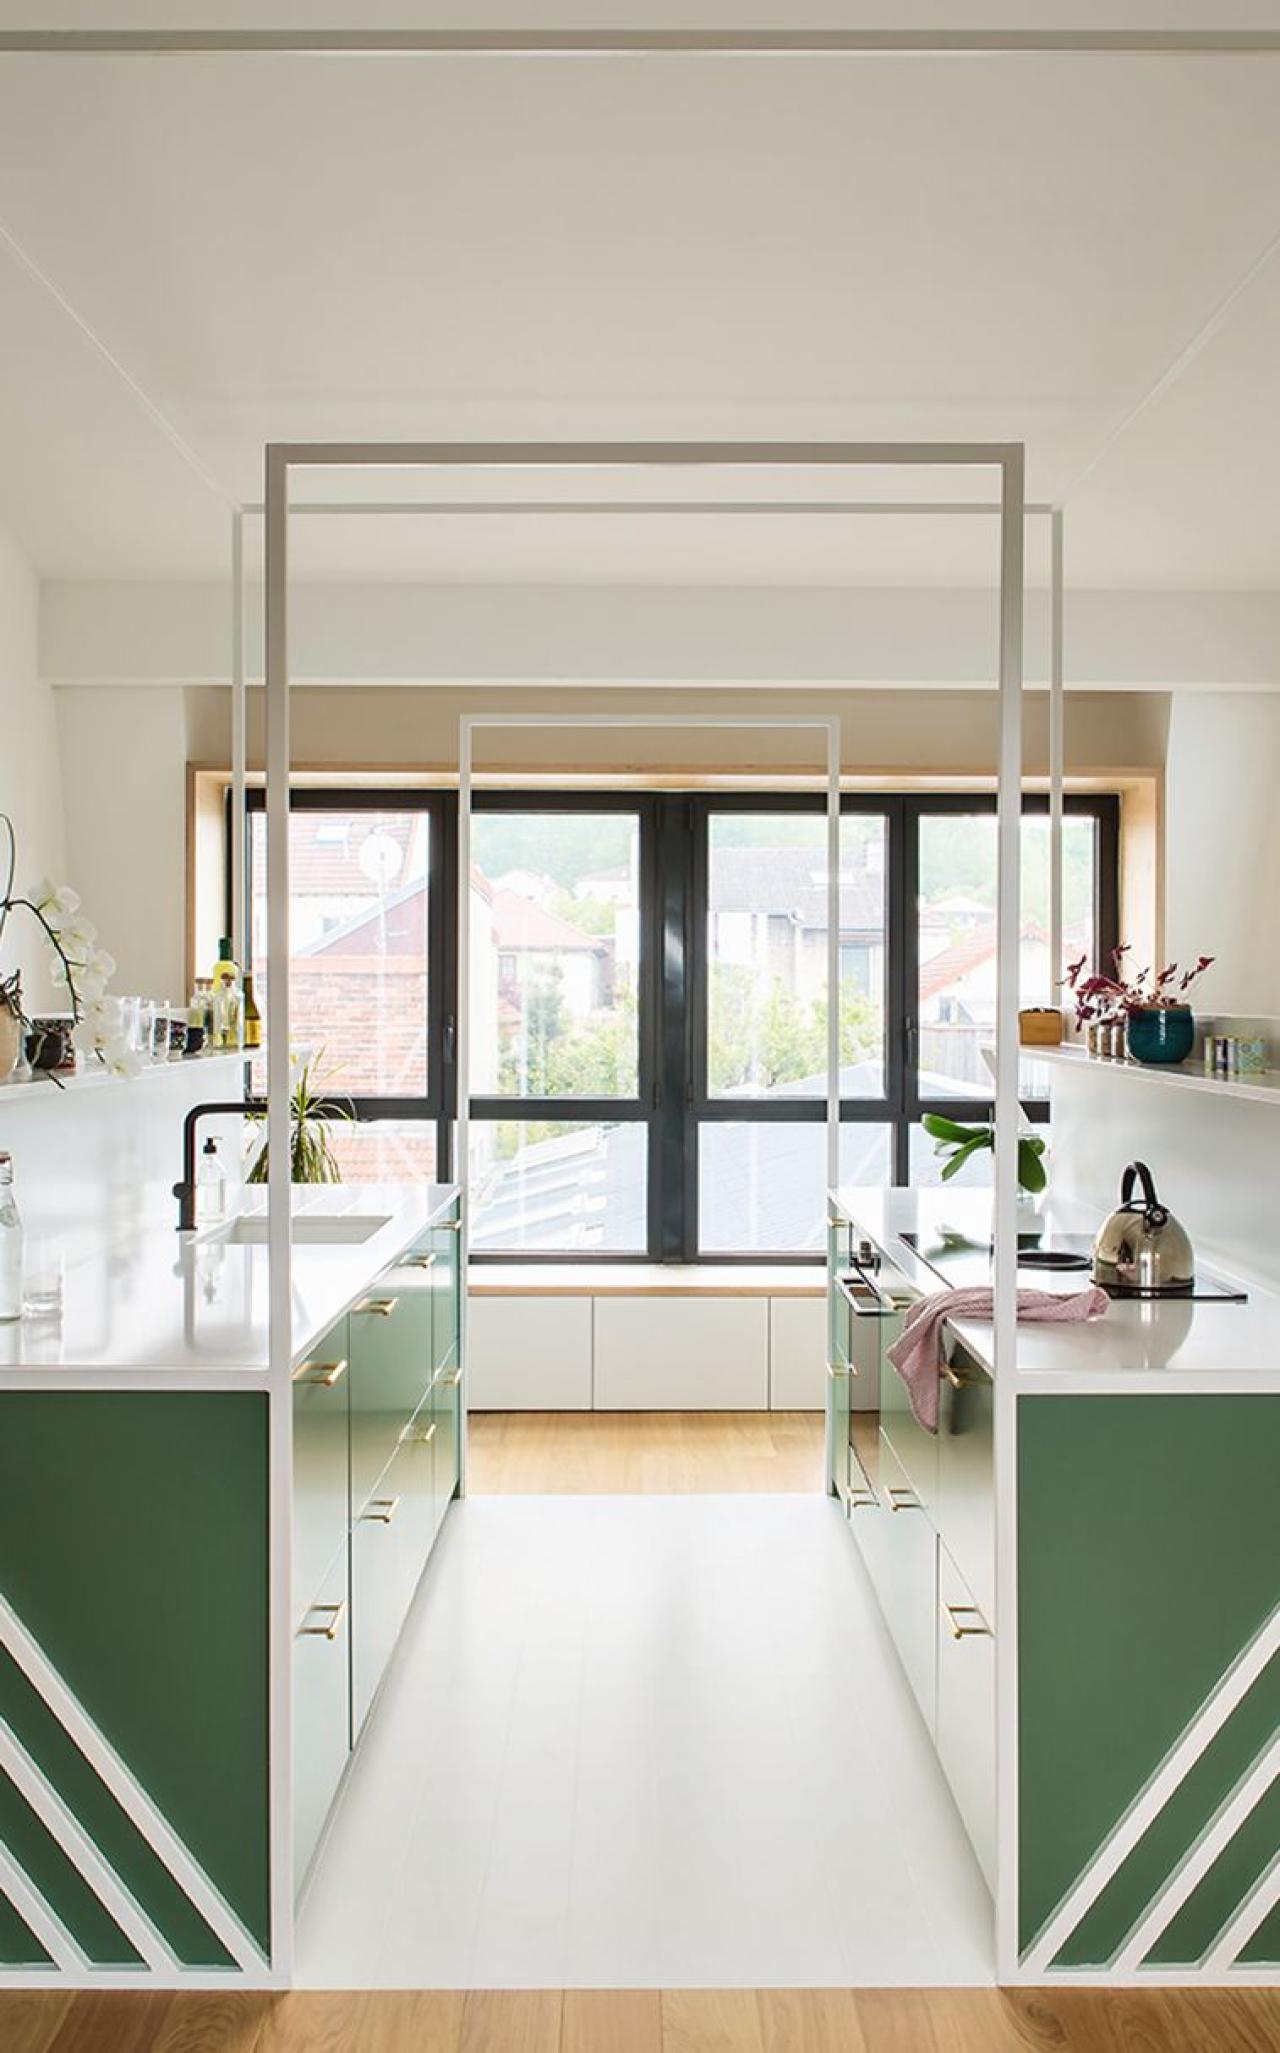 A box kitchen by Space Factory